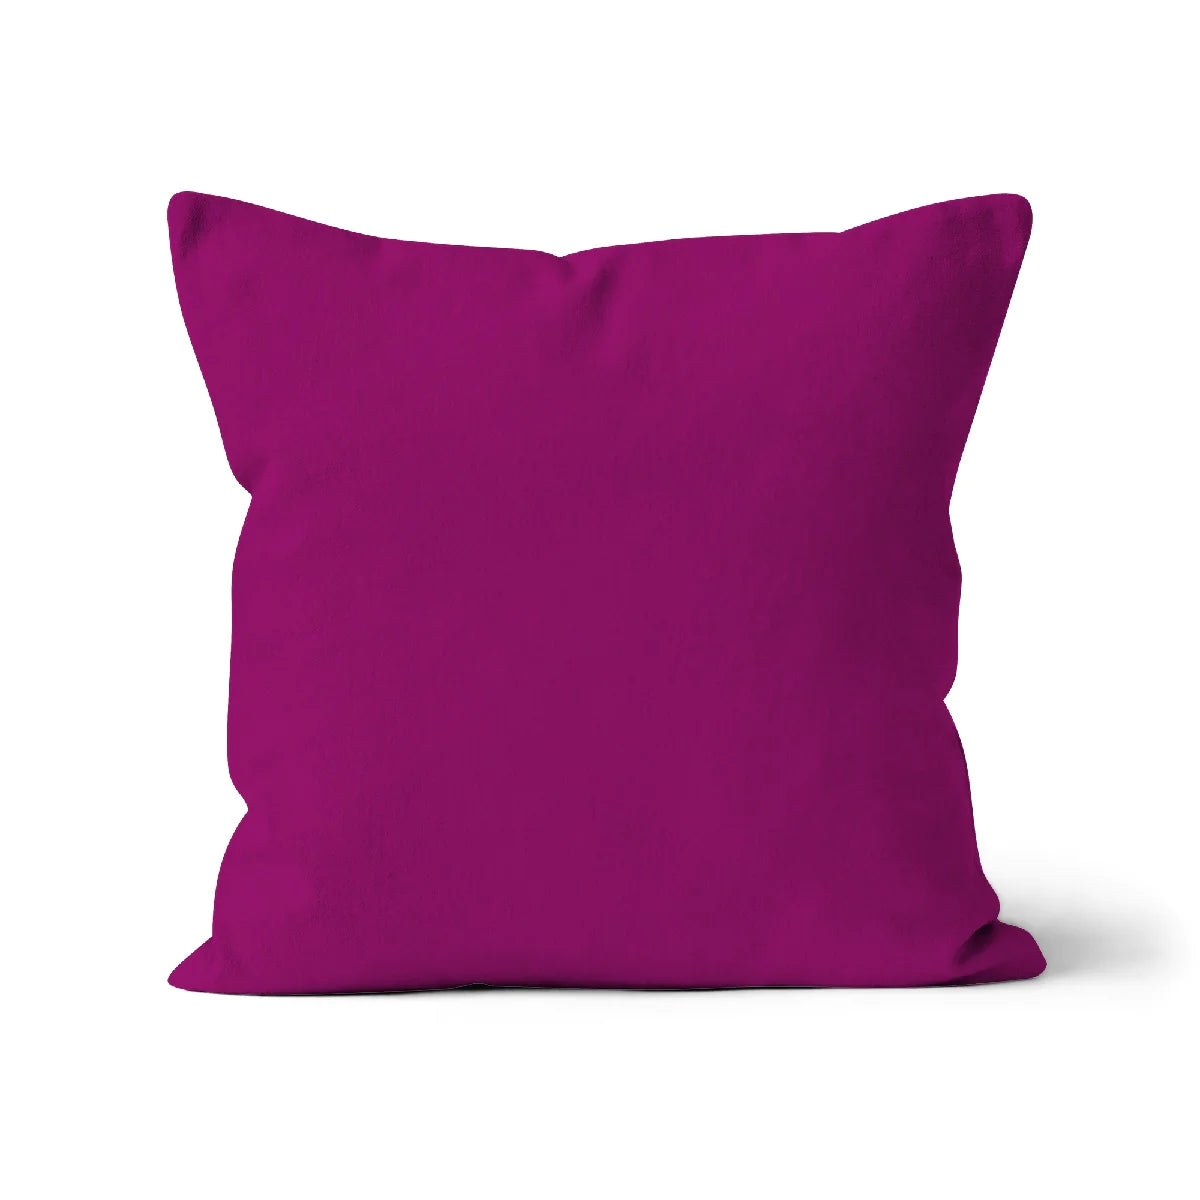 Purple colour cushion cover. Organic cushion cover, dark pink cushion cover. Made in the uk. British made homeware.Minimalist Plum-Pink Cushion, Luxurious Orchid Sofa Accessory, Handcrafted Deep Purple-Pink Throw Pillow, High-End British Deep Purple-Pink Cushion, Orchid-Coloured Decorative Cushion, Deep Mauve Home Textile.